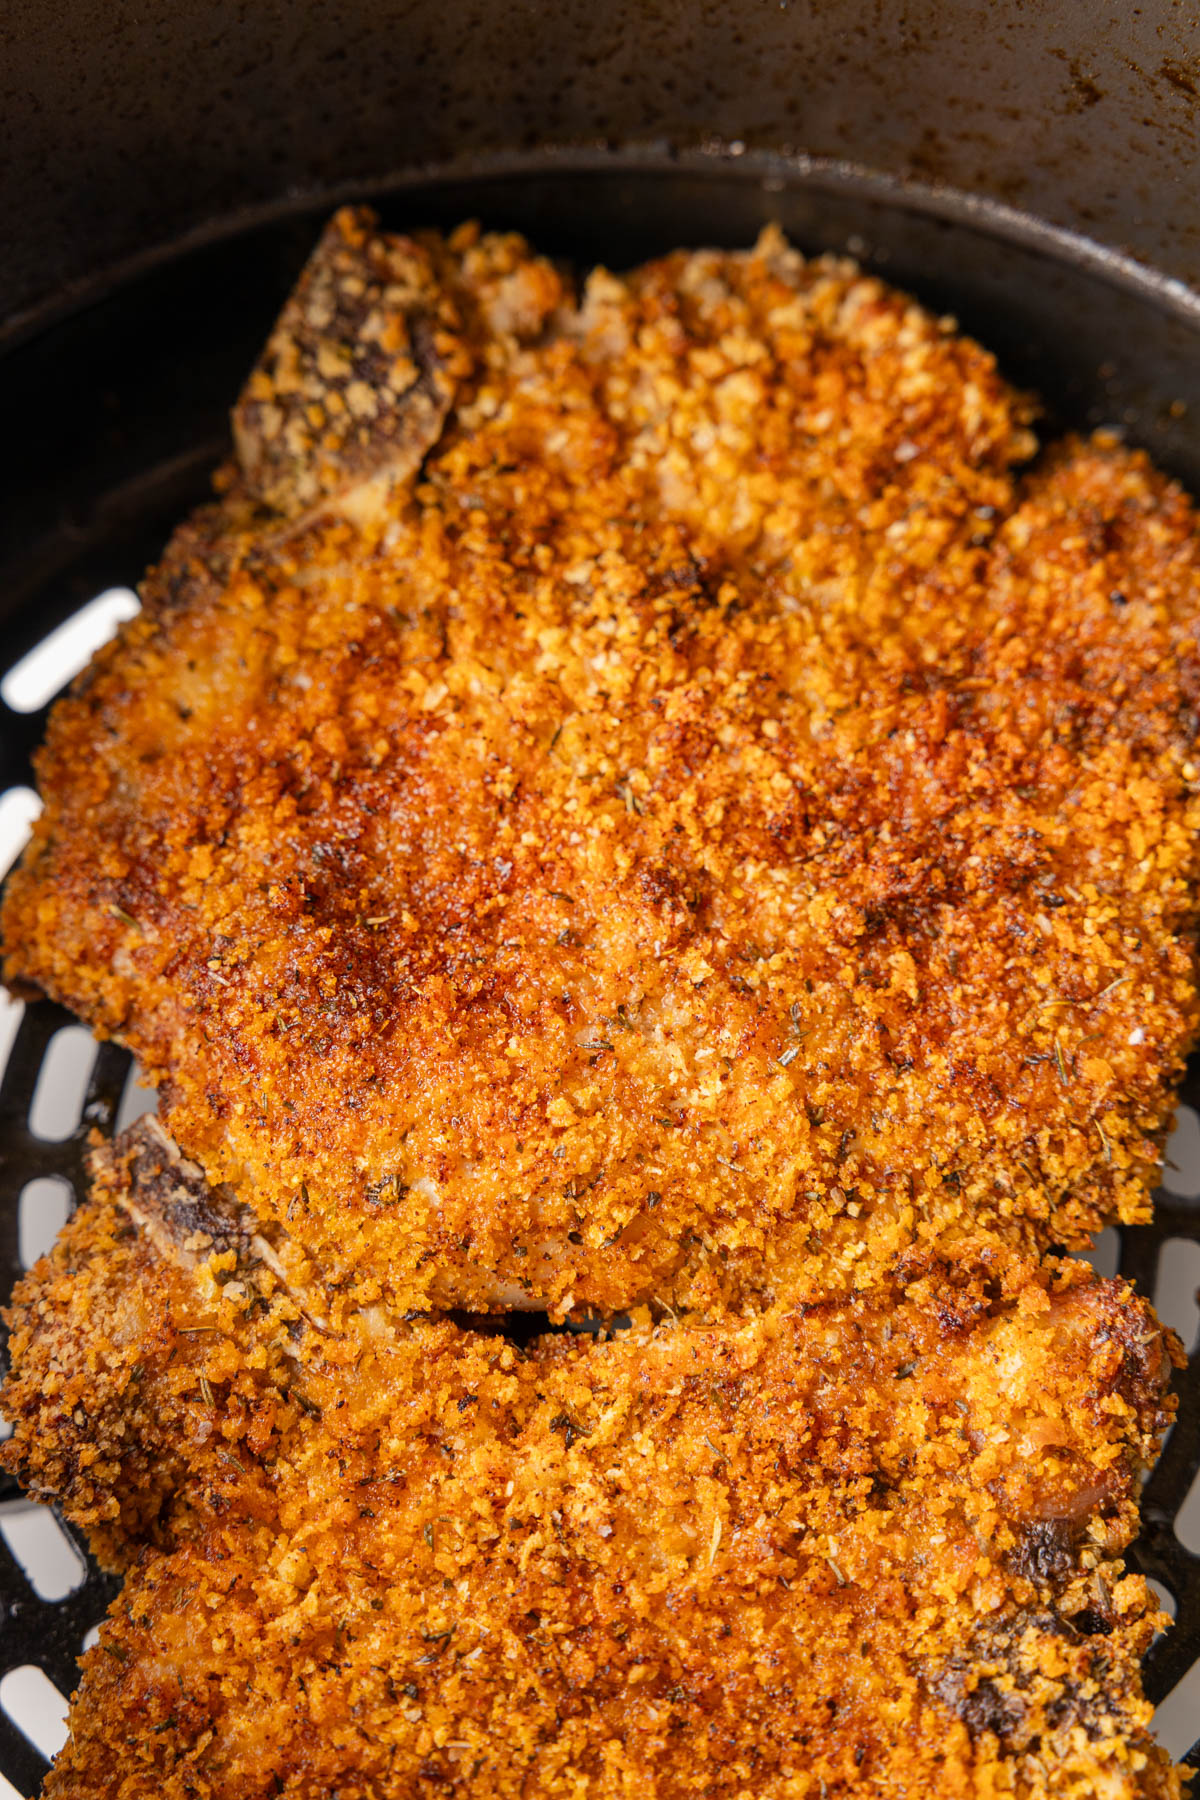 Overhead image of a cooked pork chop, with a golden brown crust. 